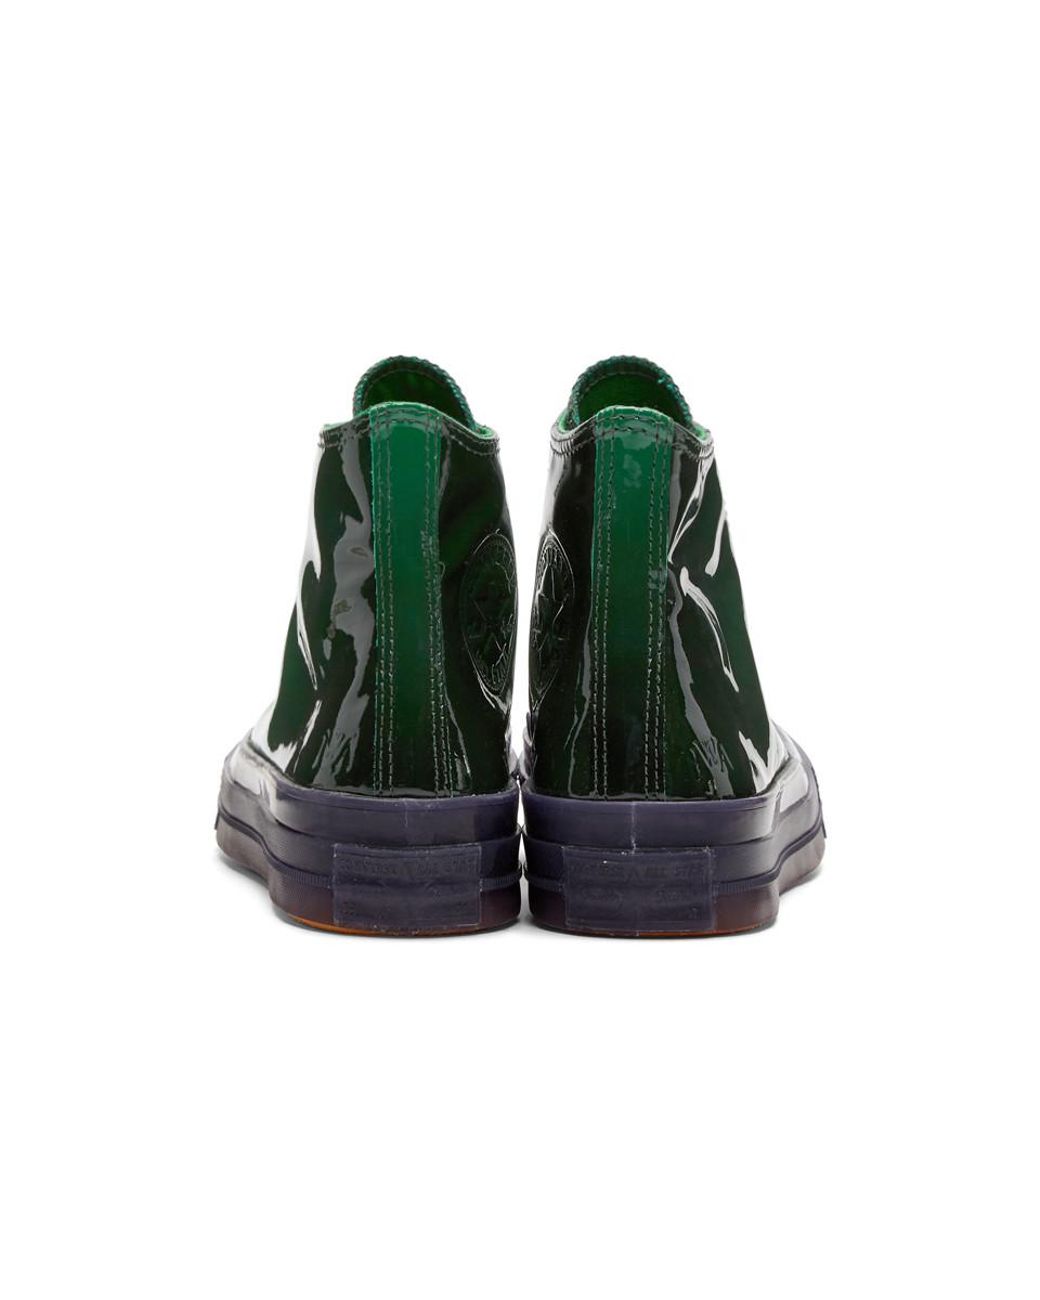 JW Anderson Leather Green Converse Edition Patent Chuck Taylor 70 Toy Hi  Sneakers | Lyst Australia